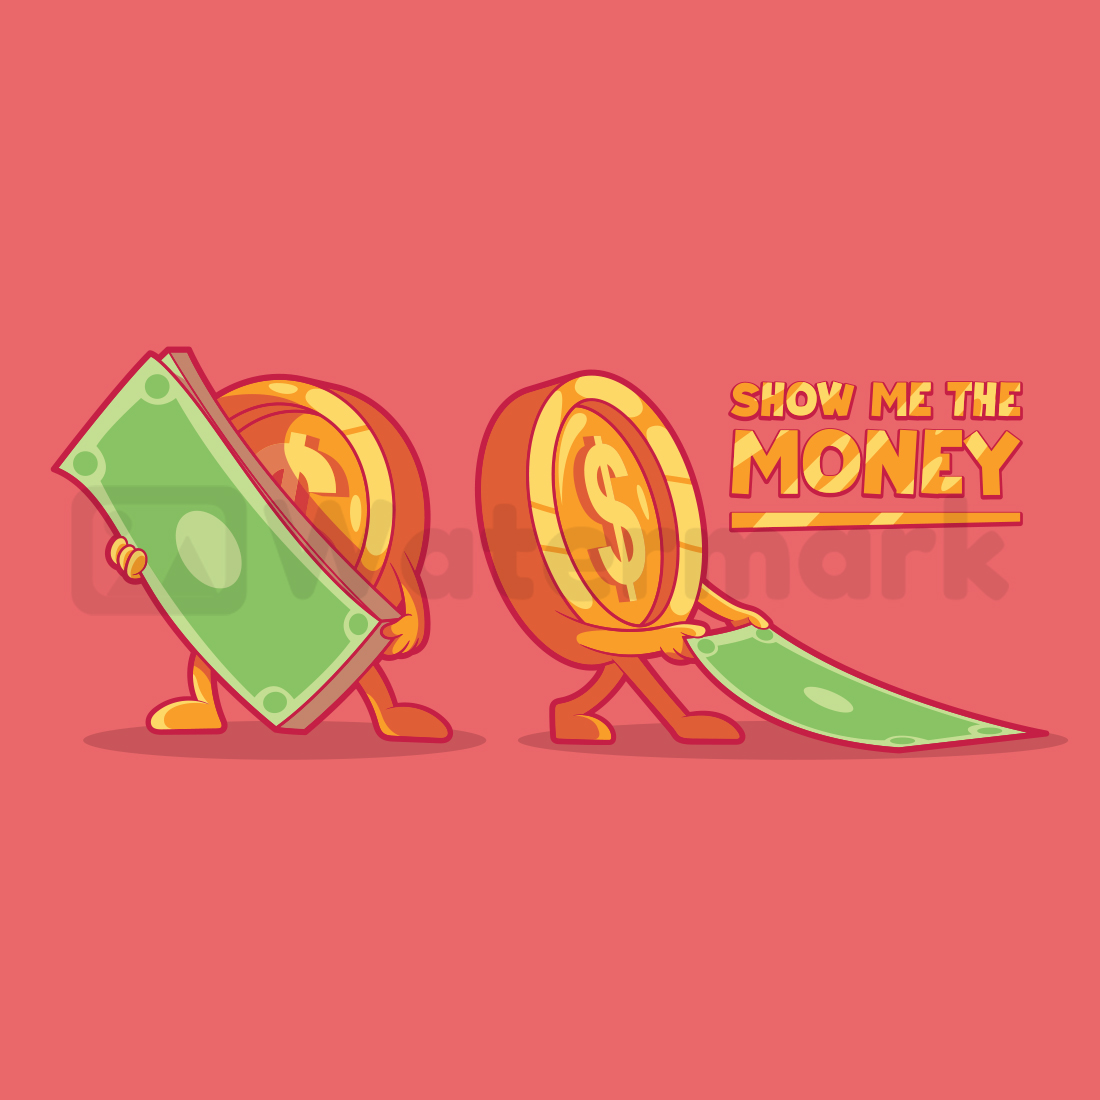 Show Me the Money! preview image.